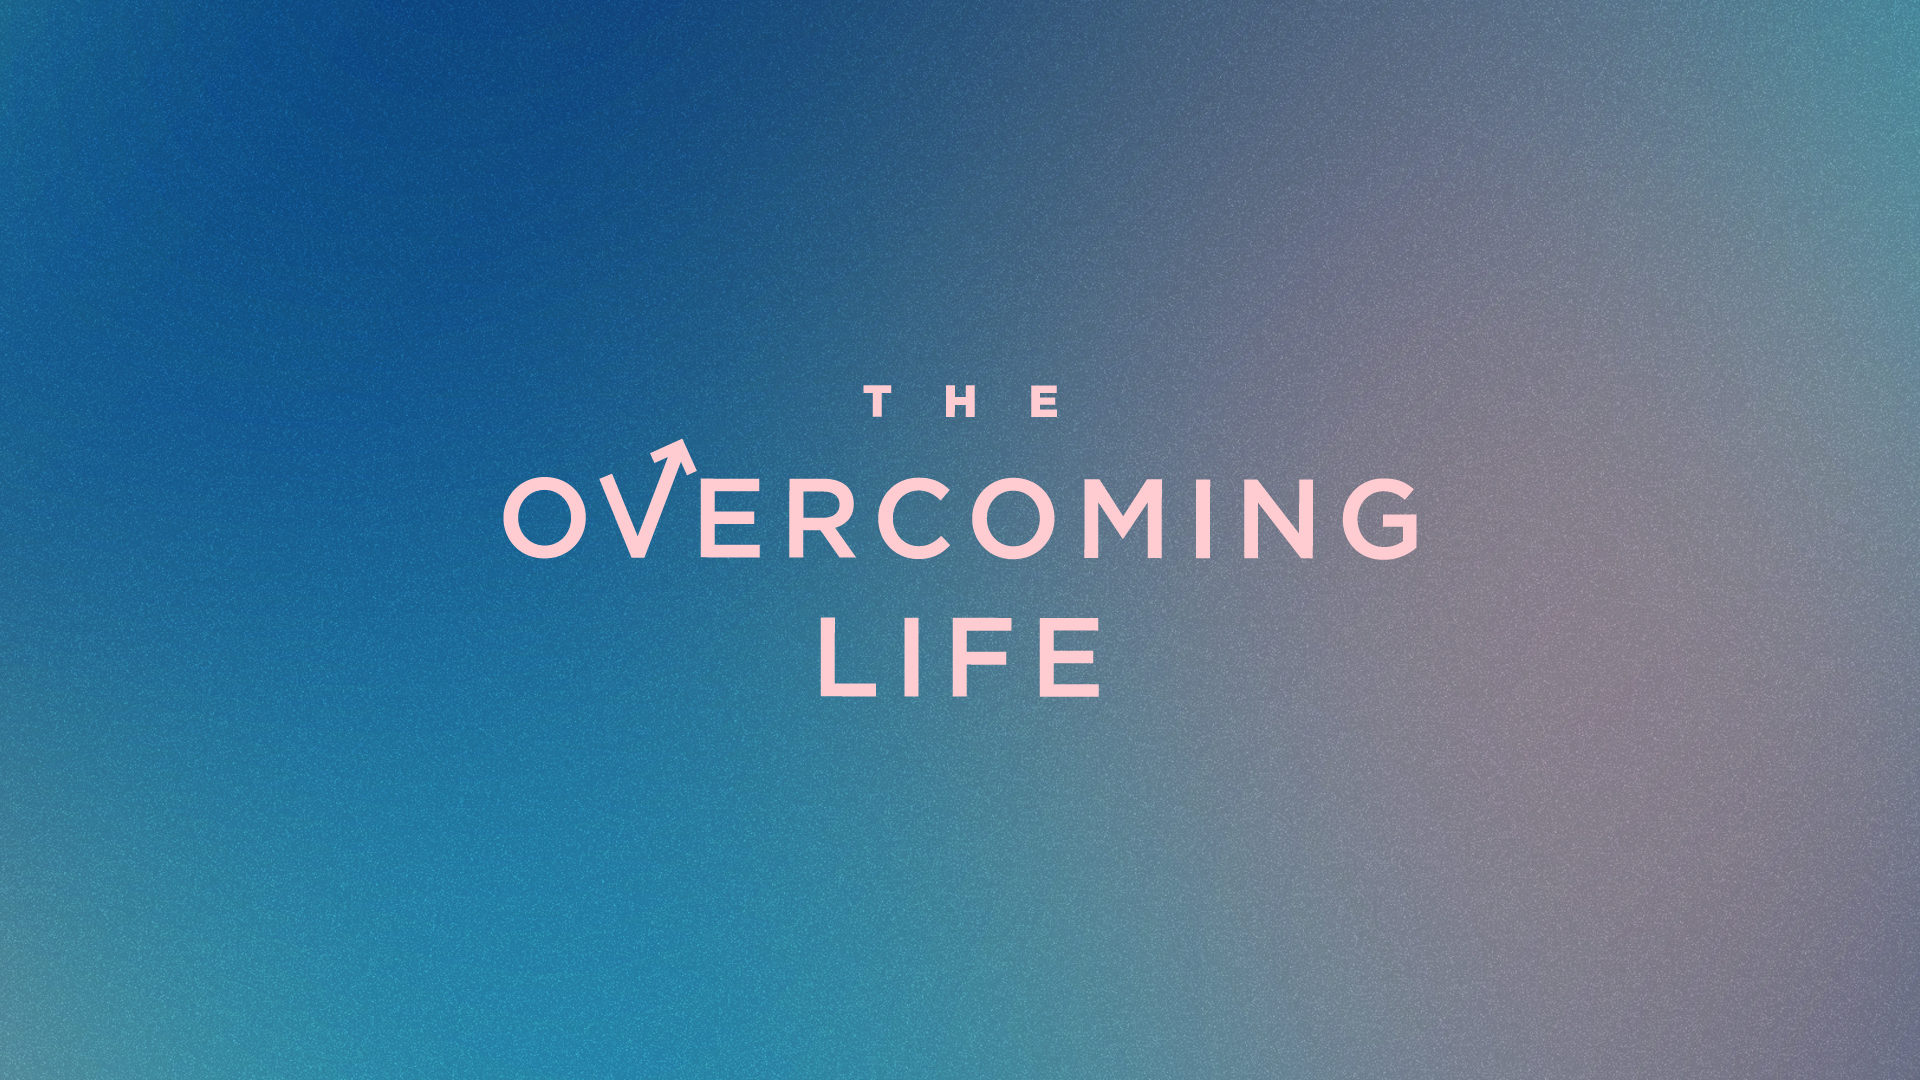 We Are To Take The Overcoming Life Seriously